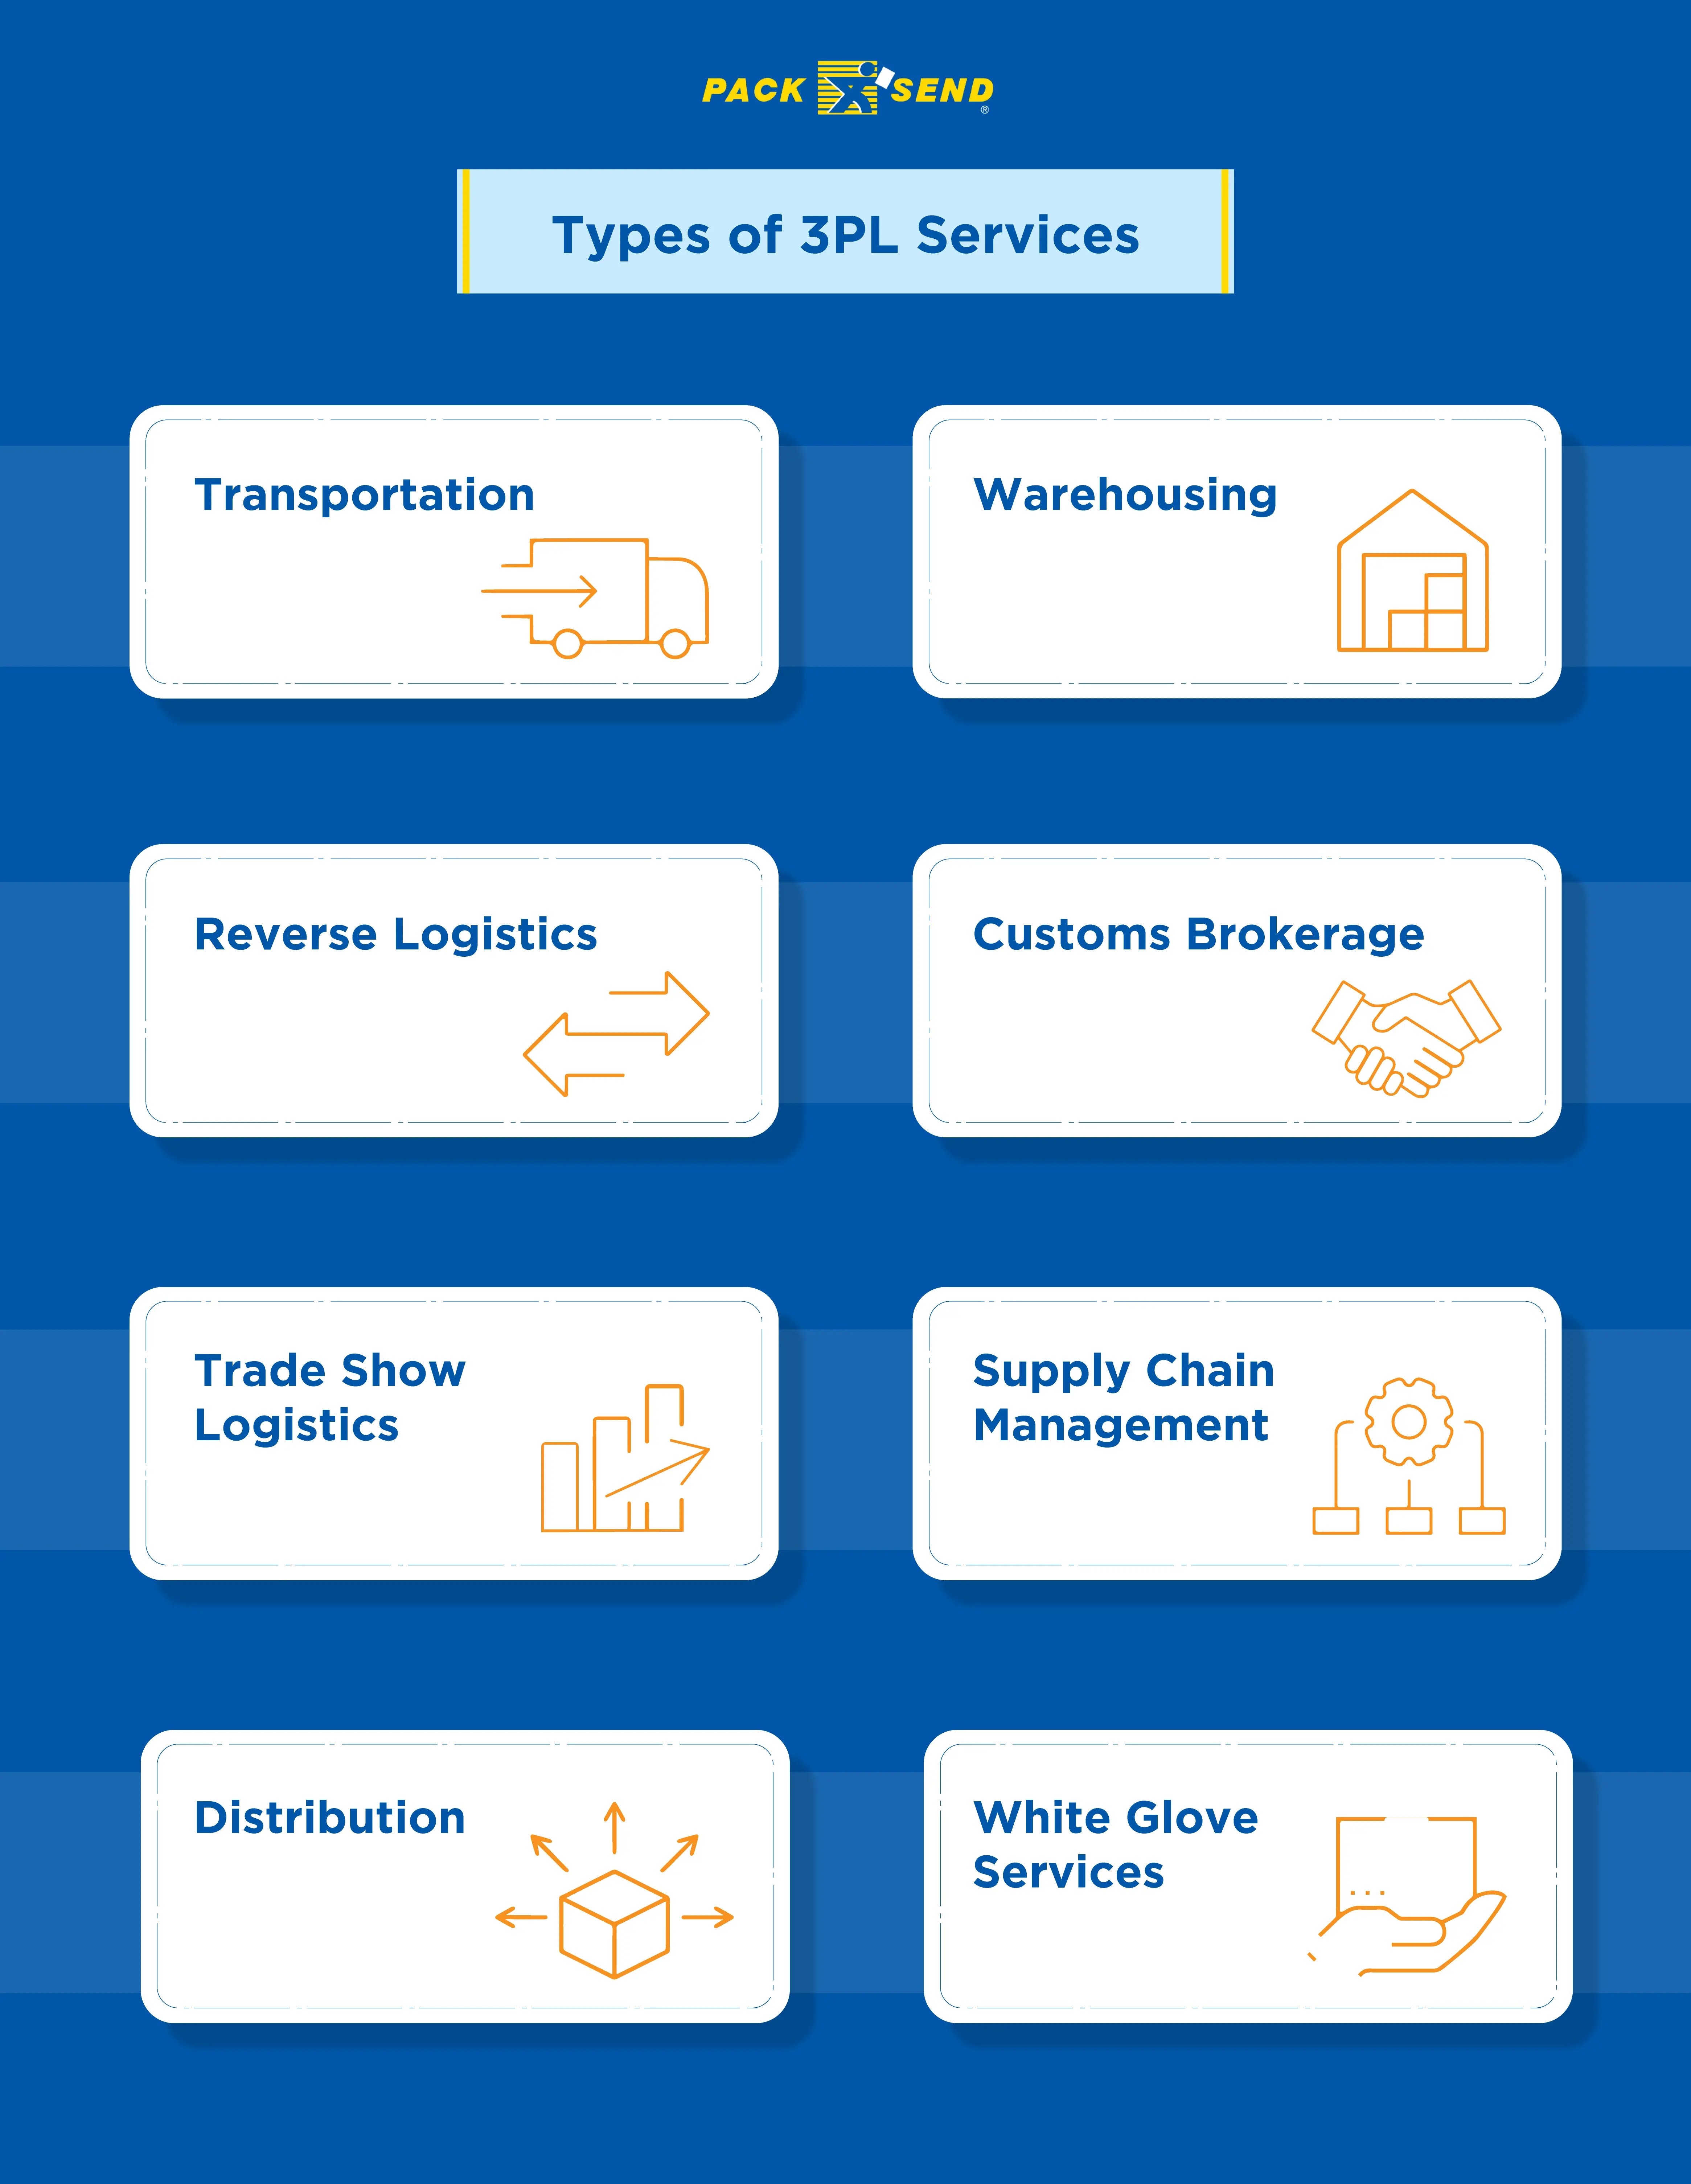 Types-of-3pl-services